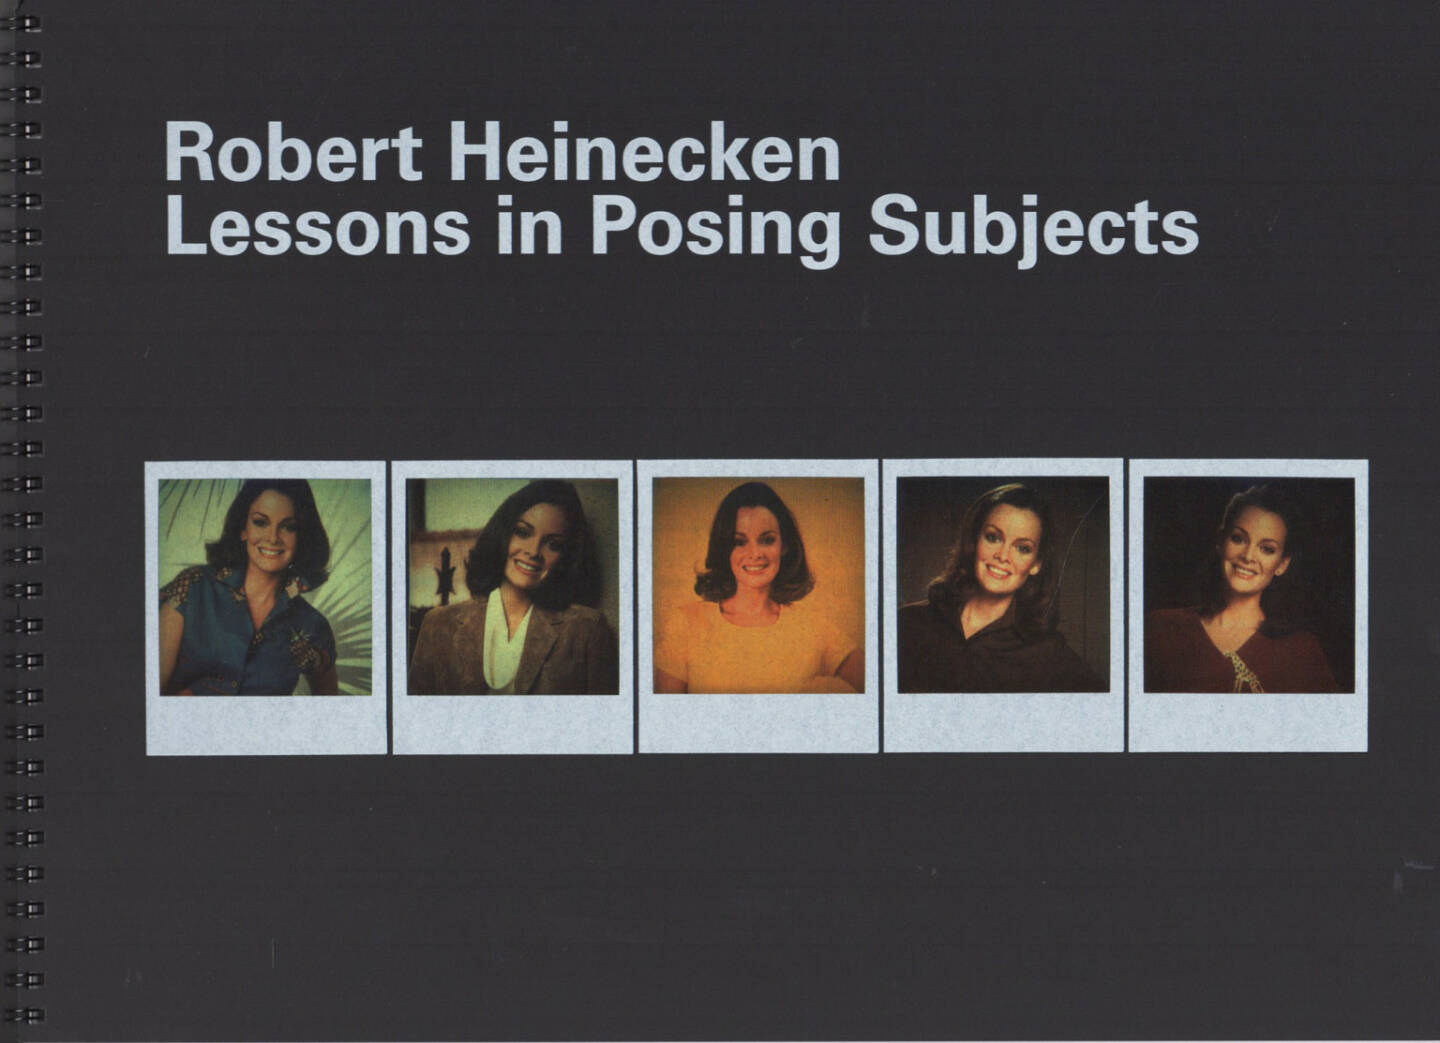 Robert Heinecken - Lessons in Posing Subjects, Triangle Books/WIELS 2014, Cover - http://josefchladek.com/book/robert_heinecken_-_lessons_in_posing_subjects